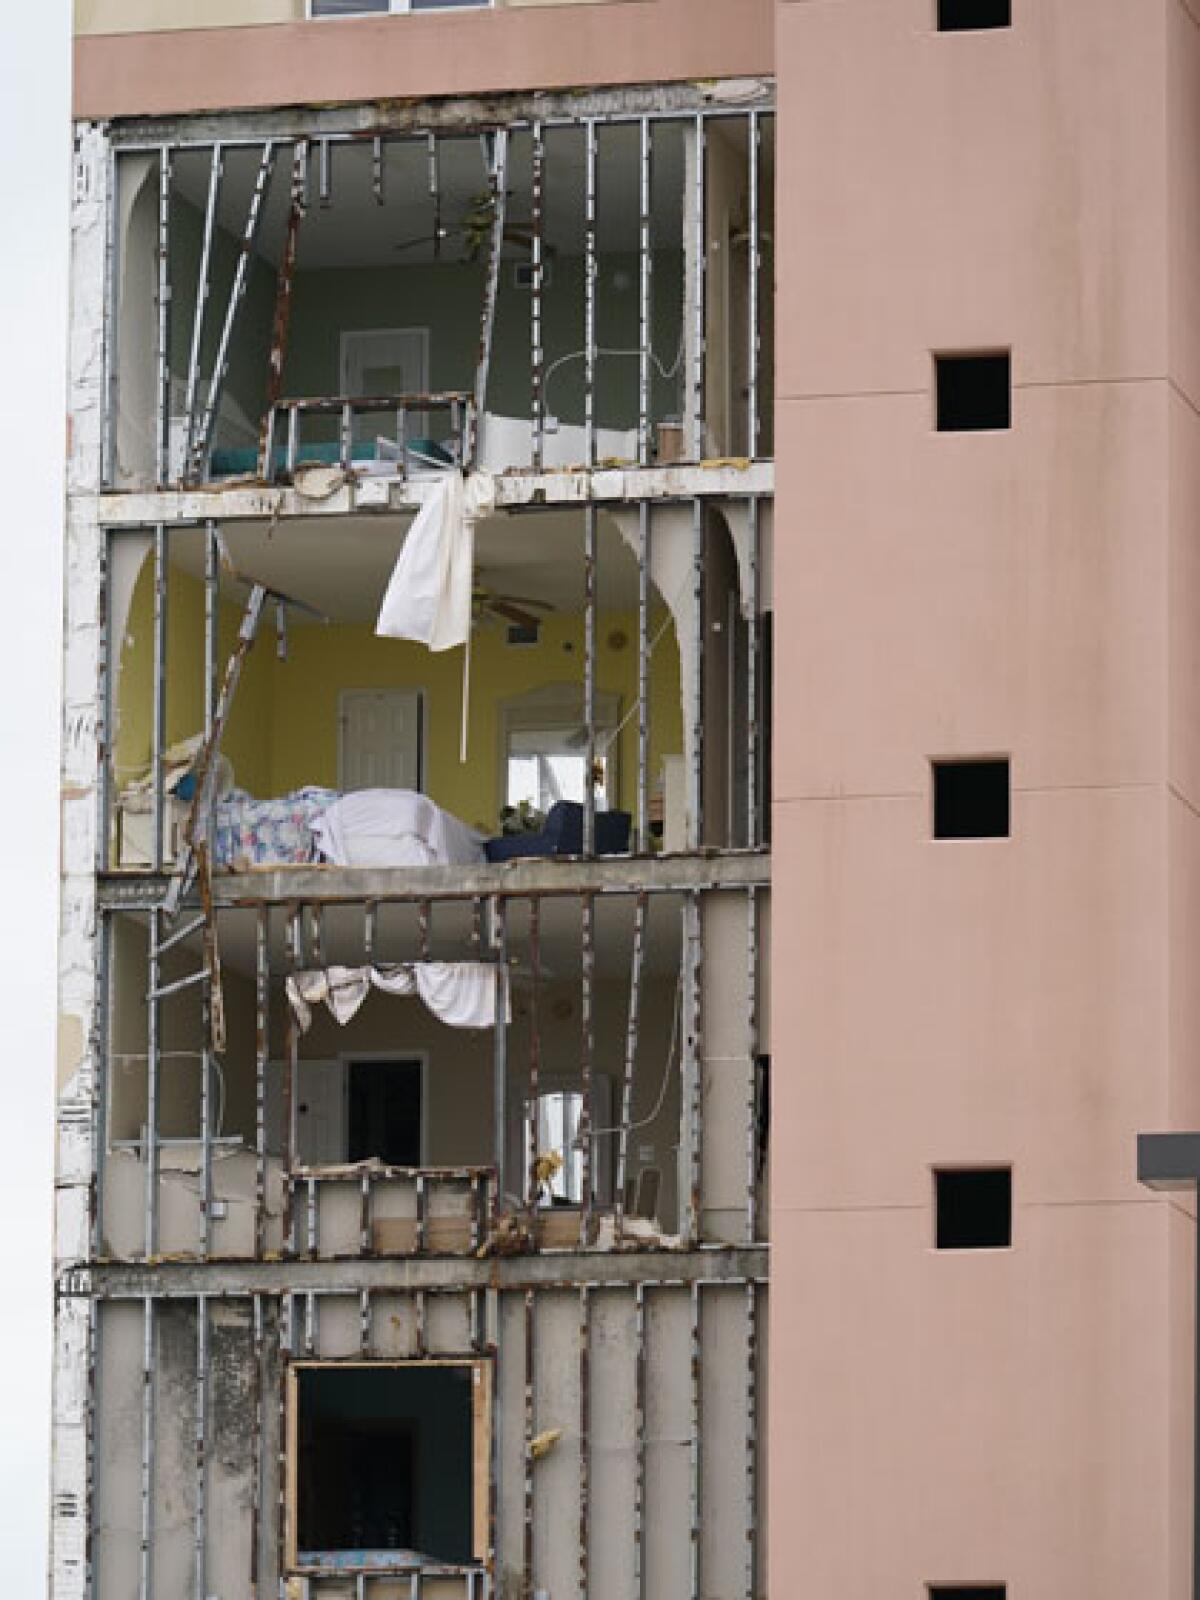 Condominiums in Orange Beach, Ala., after Hurricane Sally moved through the area on Wednesday.